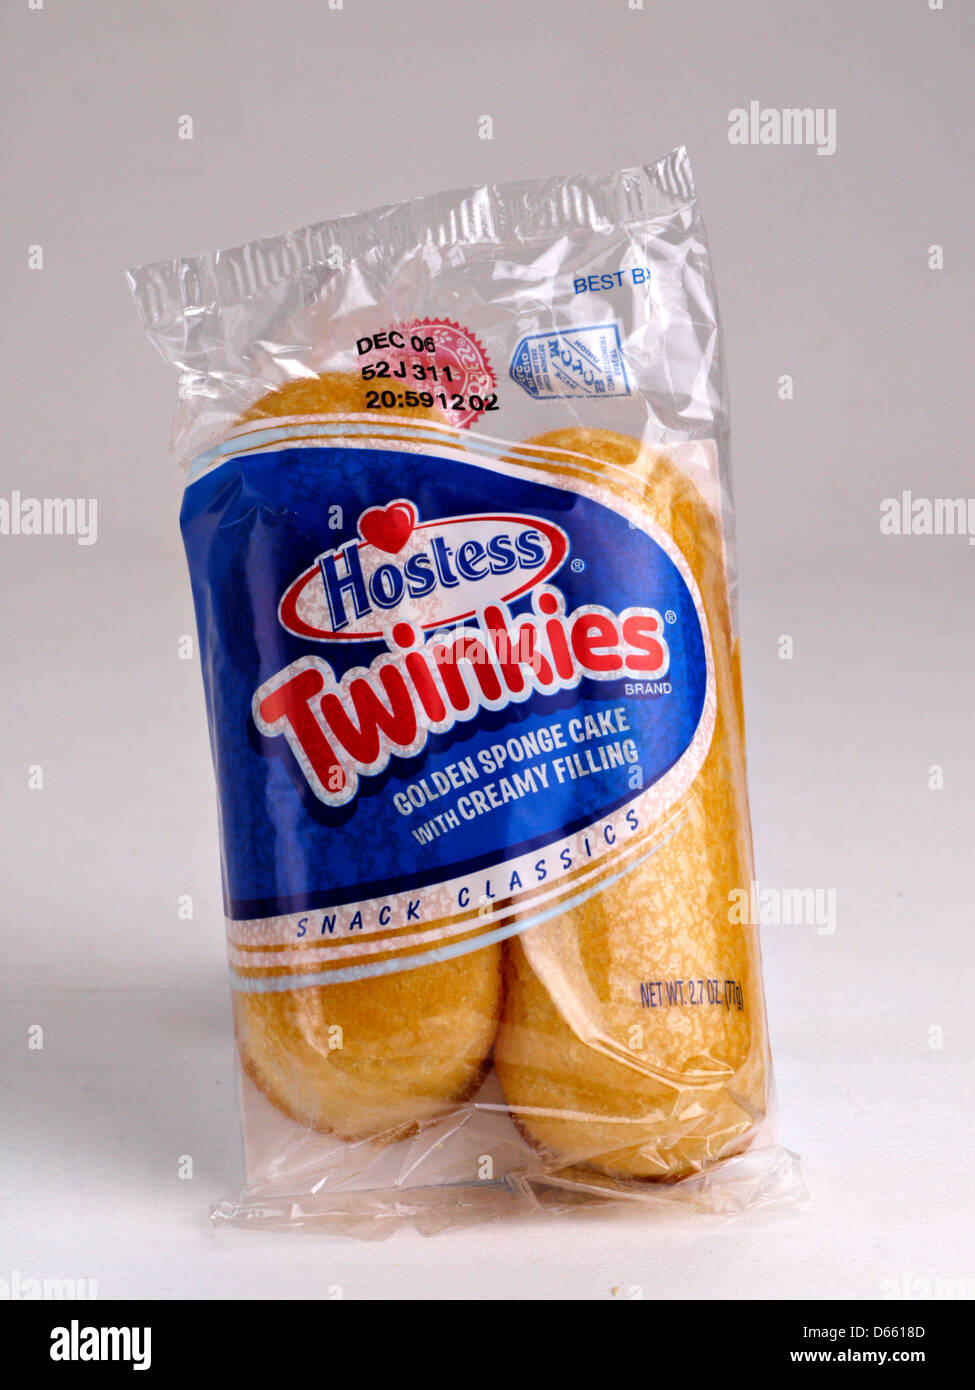 A package of Hostess Twinkies on a plain background. Stock Photo